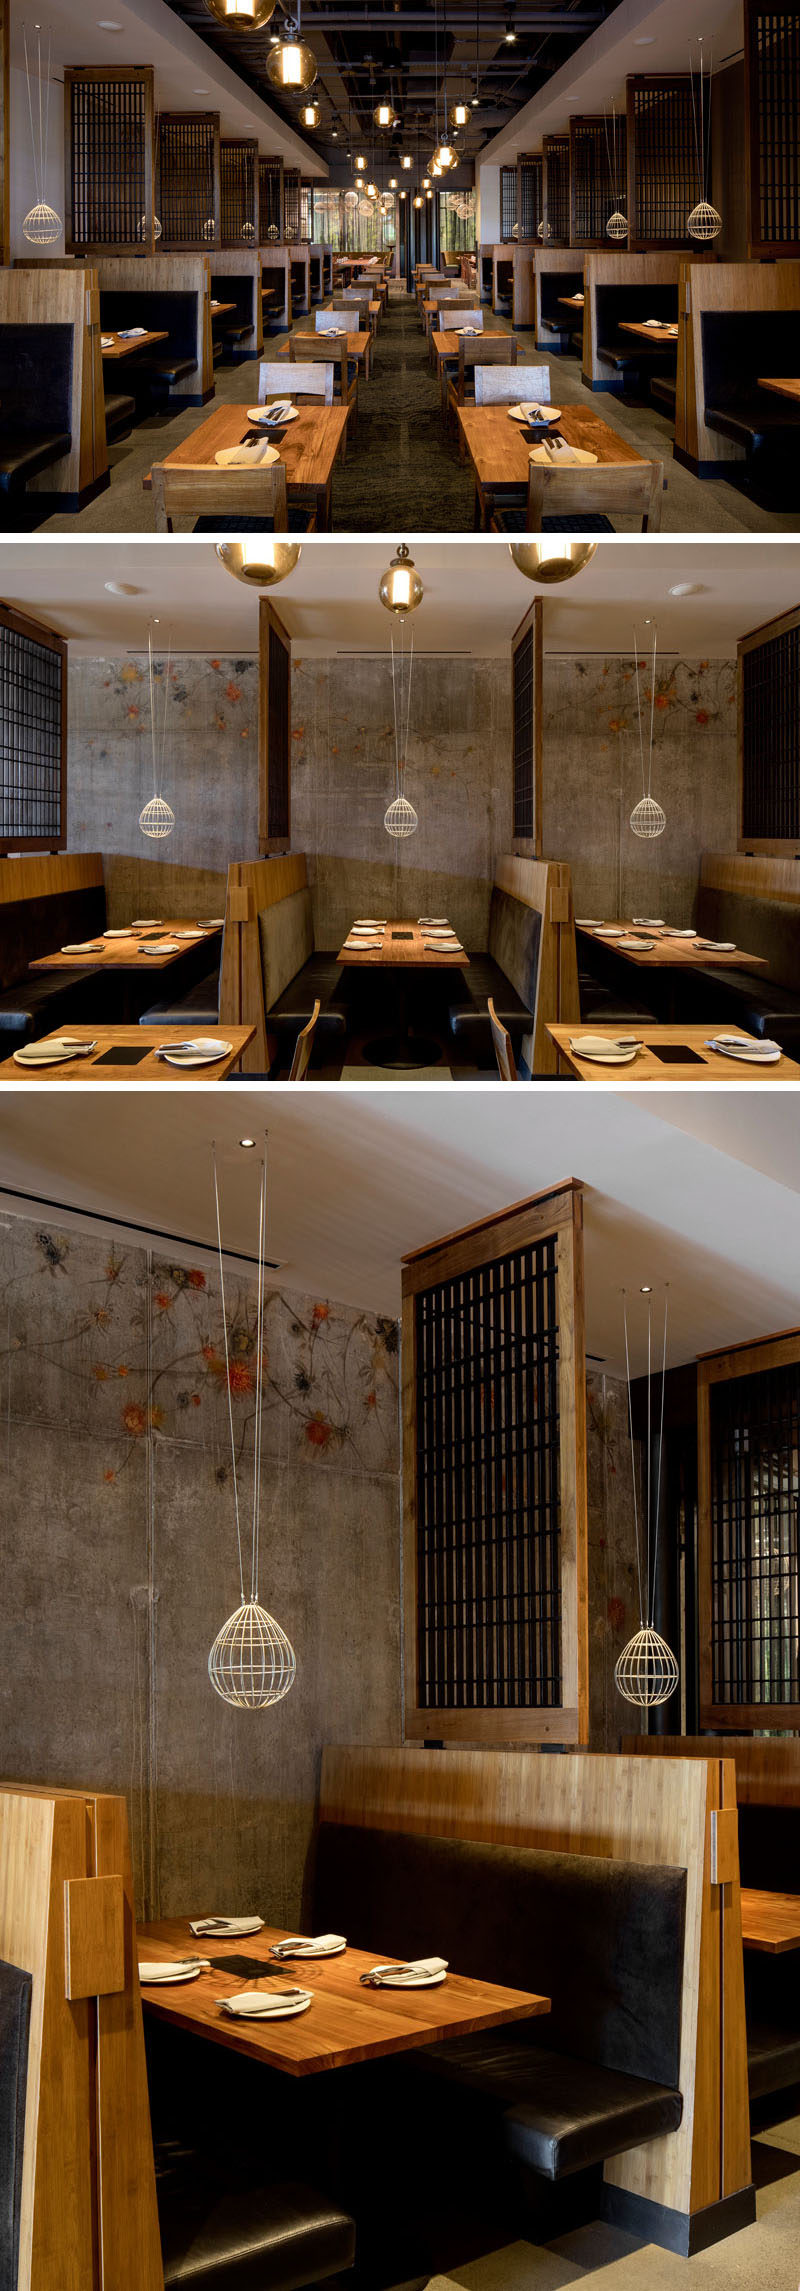 Slatted teak screens separate booths that line both sides of the dining area in this modern restaurant. #RestaurantDesign #BoothDesign